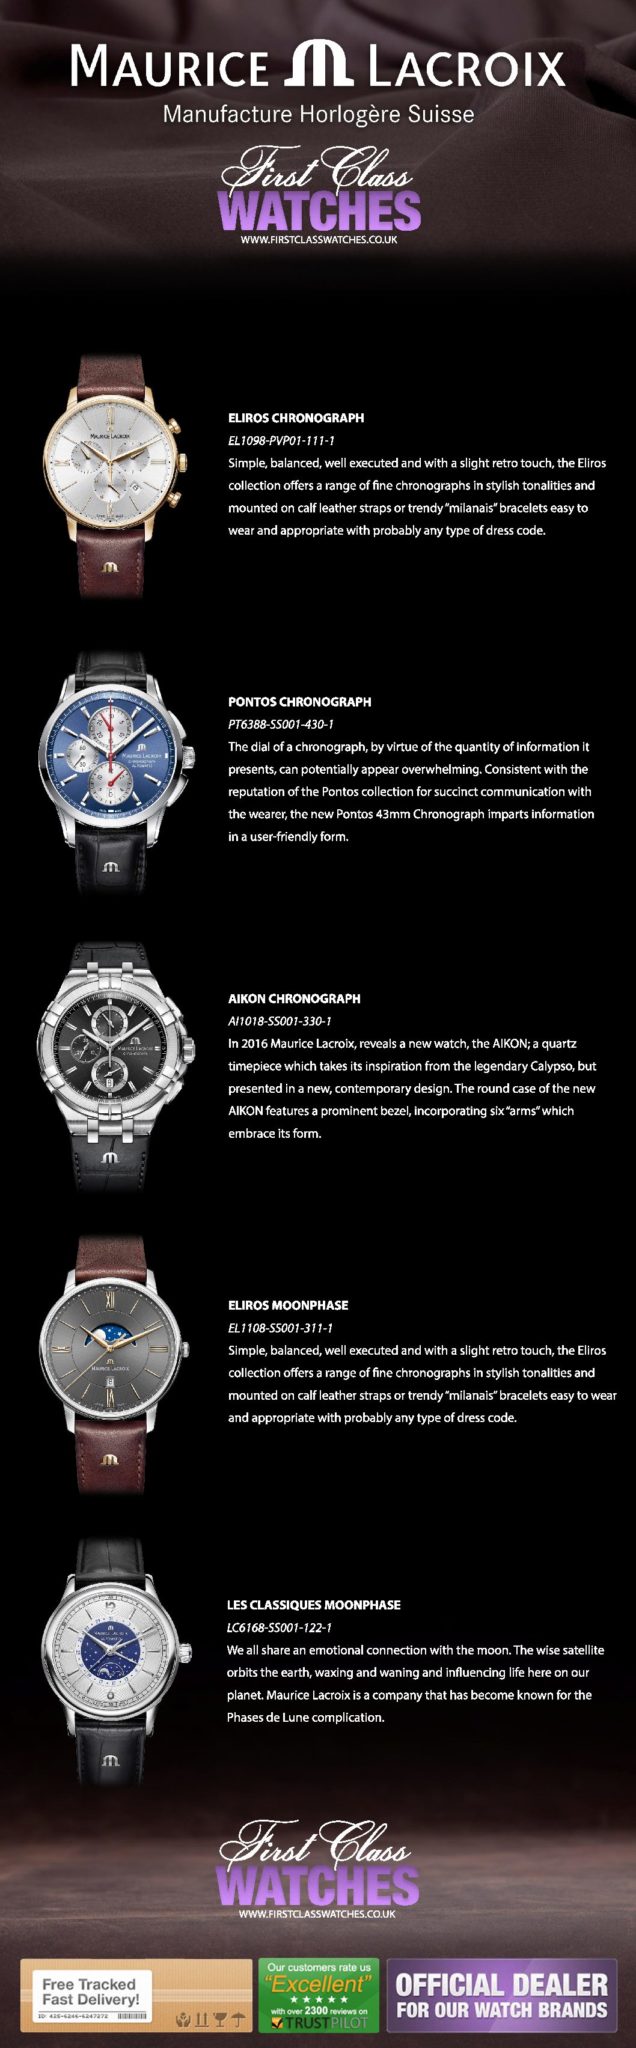 Maurice Lacroix Watches Infographic